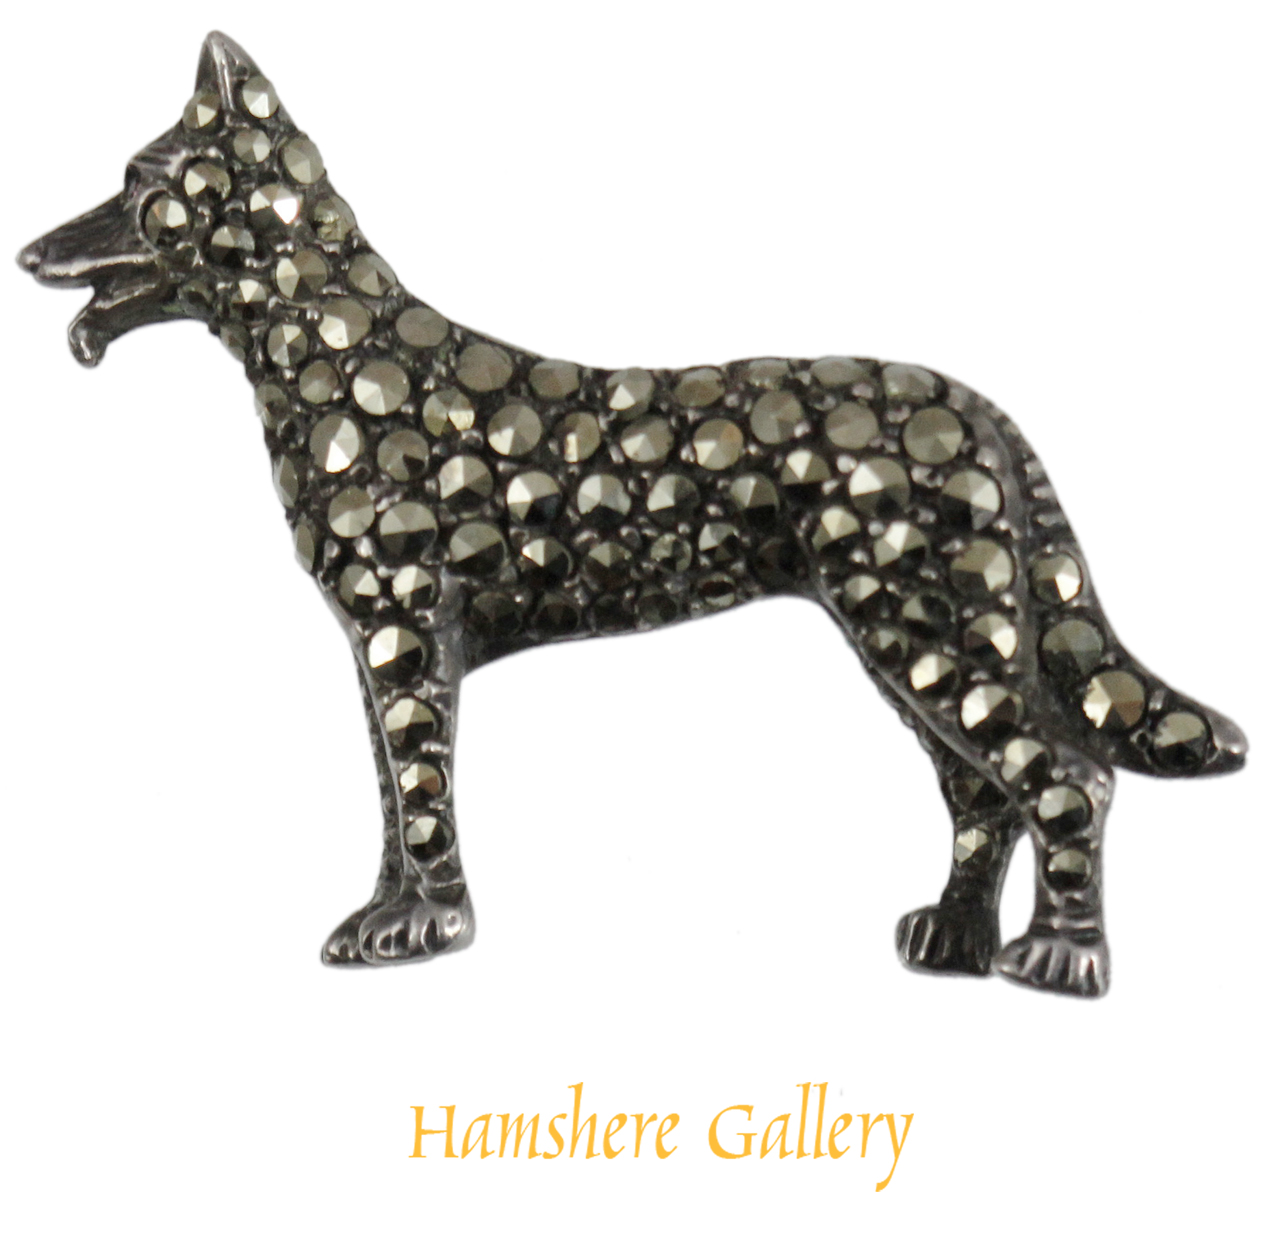 Click for larger image: Early 20th century silver set marcasite brooch of German Shepherd. - Early 20th century silver set marcasite brooch of German Shepherd.